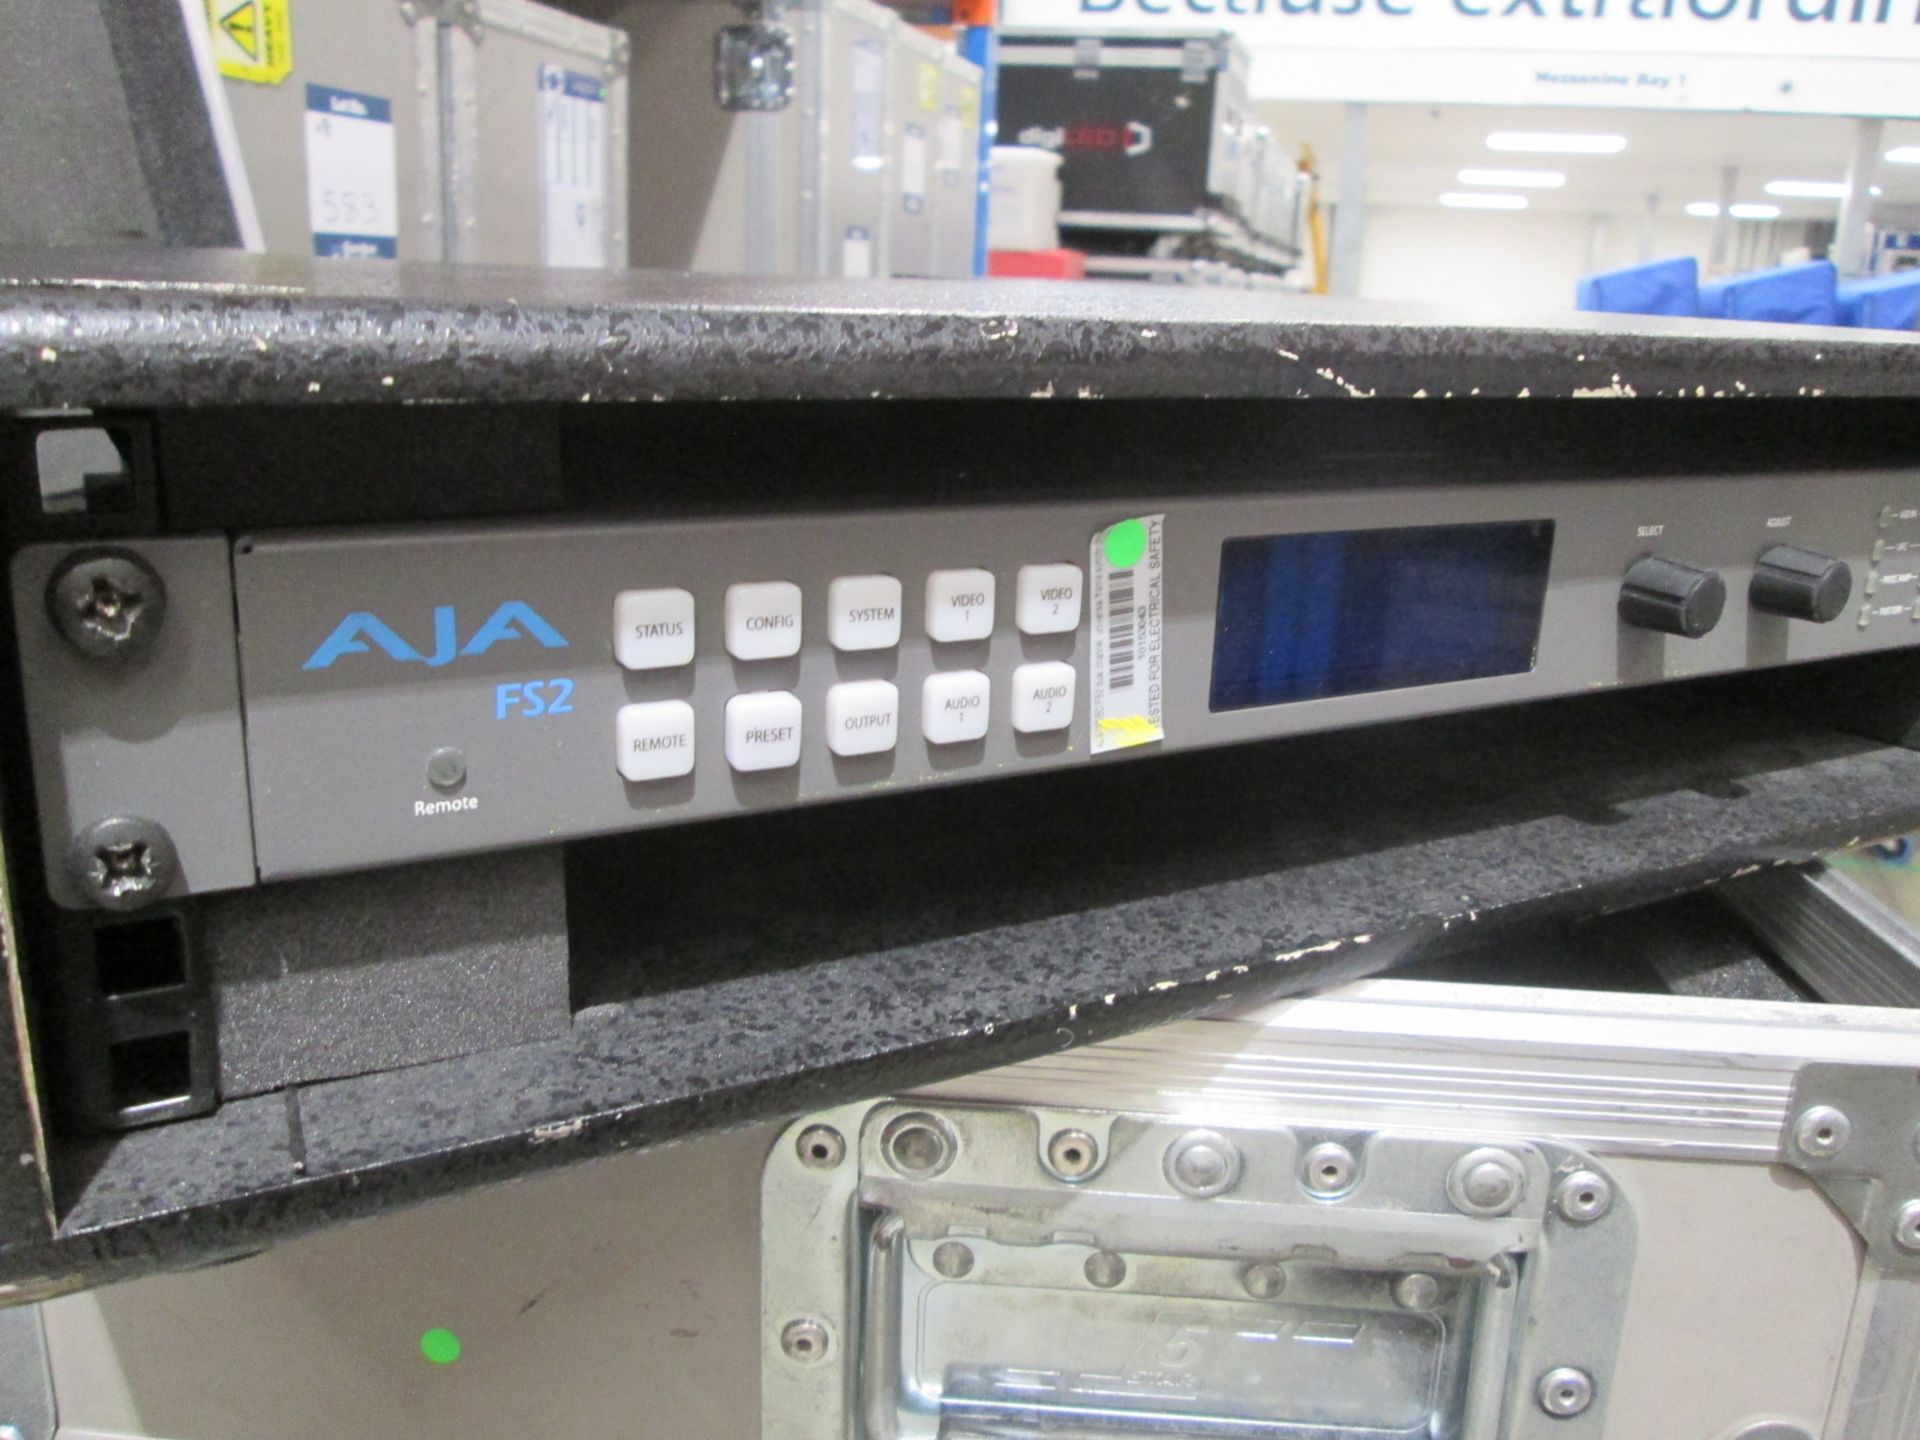 AJA FS2 Dual Channel Universal Frame Syncroniser, In flight case - Image 2 of 5